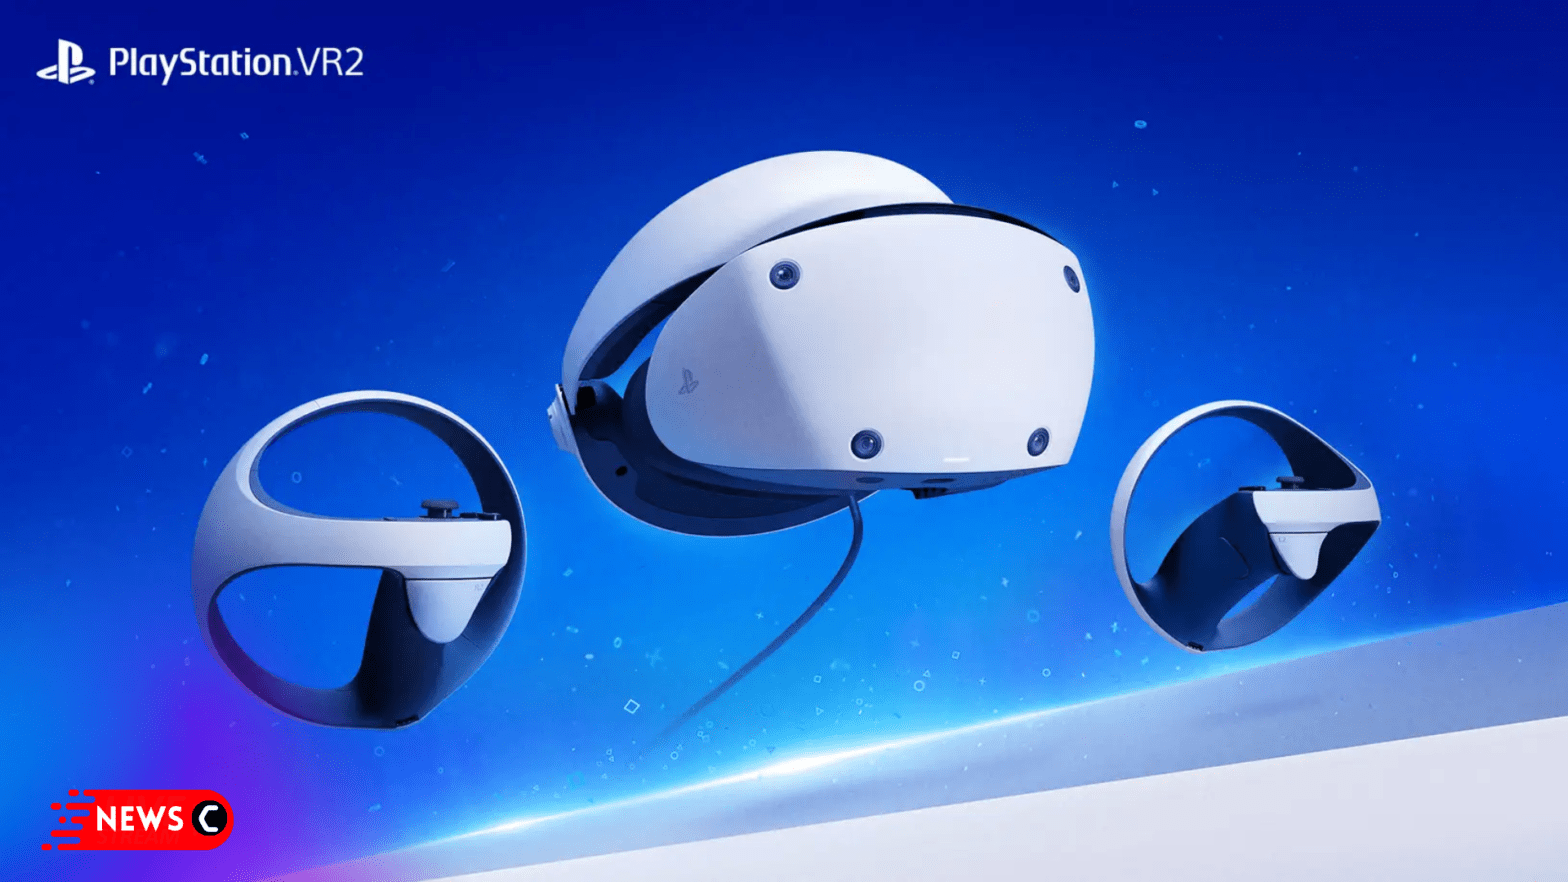 Latest: PlayStation VR2 Release Date and Price Confirmed